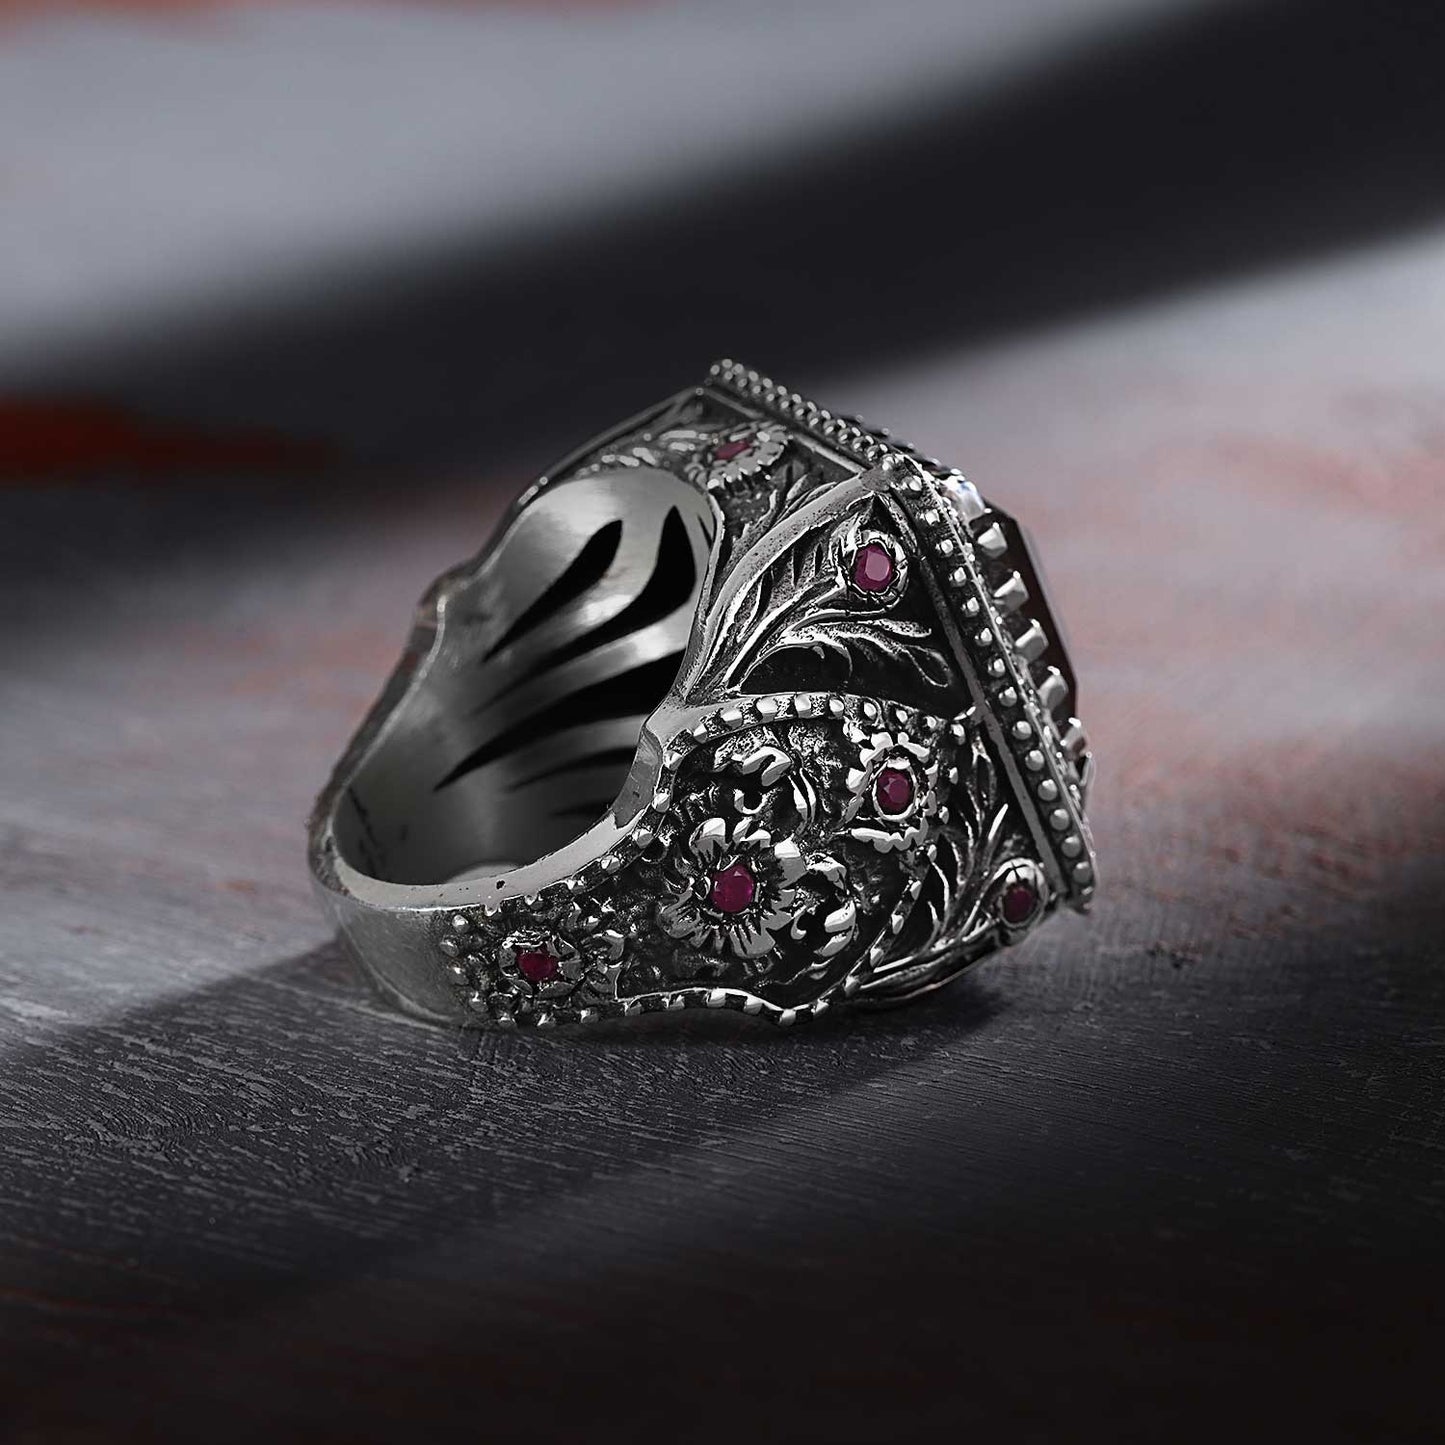 RARE PRINCE by CARAT SUTRA | Unique Handmade Turkish Style Ring Studded with AAA+ Red Zirconia | 925 Sterling Silver Oxidized Ring | Men's Jewelry | With Certificate of Authenticity and 925 Hallmark - caratsutra